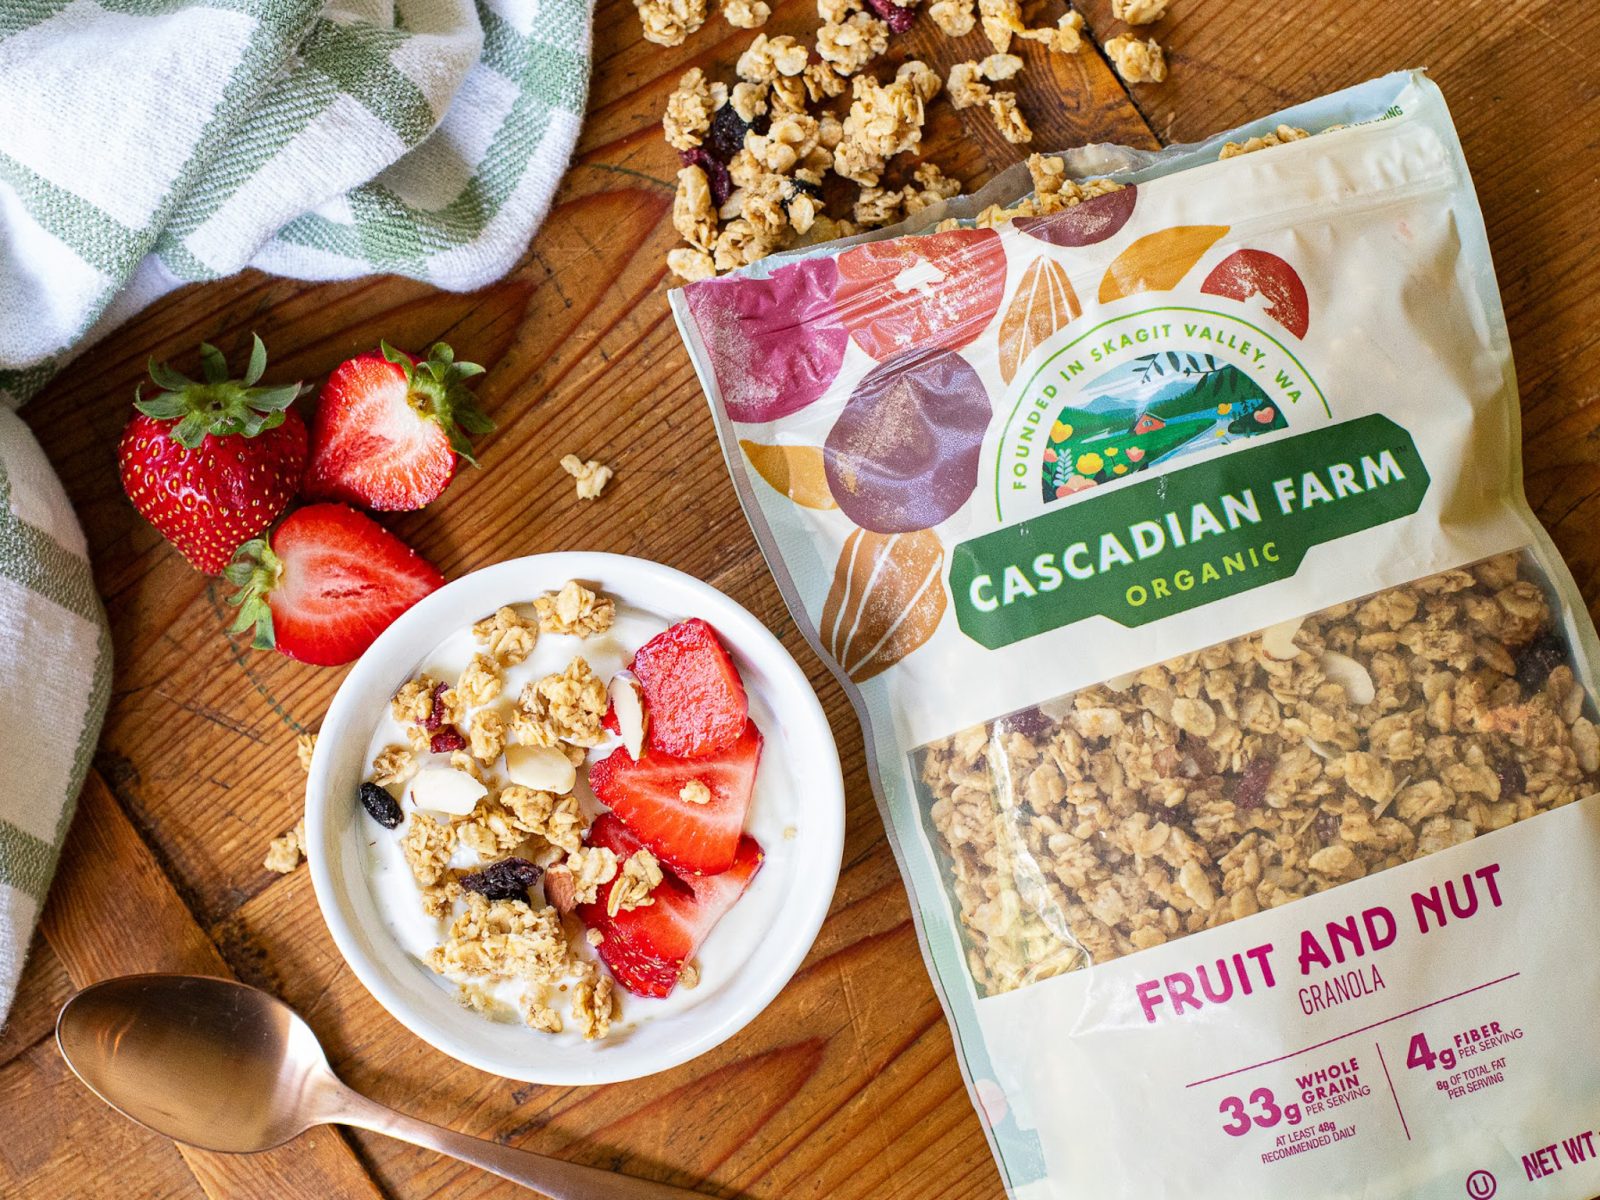 Get The Bags Of Cascadian Farm Organic Granola For Just $2.99 At Kroger (Regular Price $4.99)